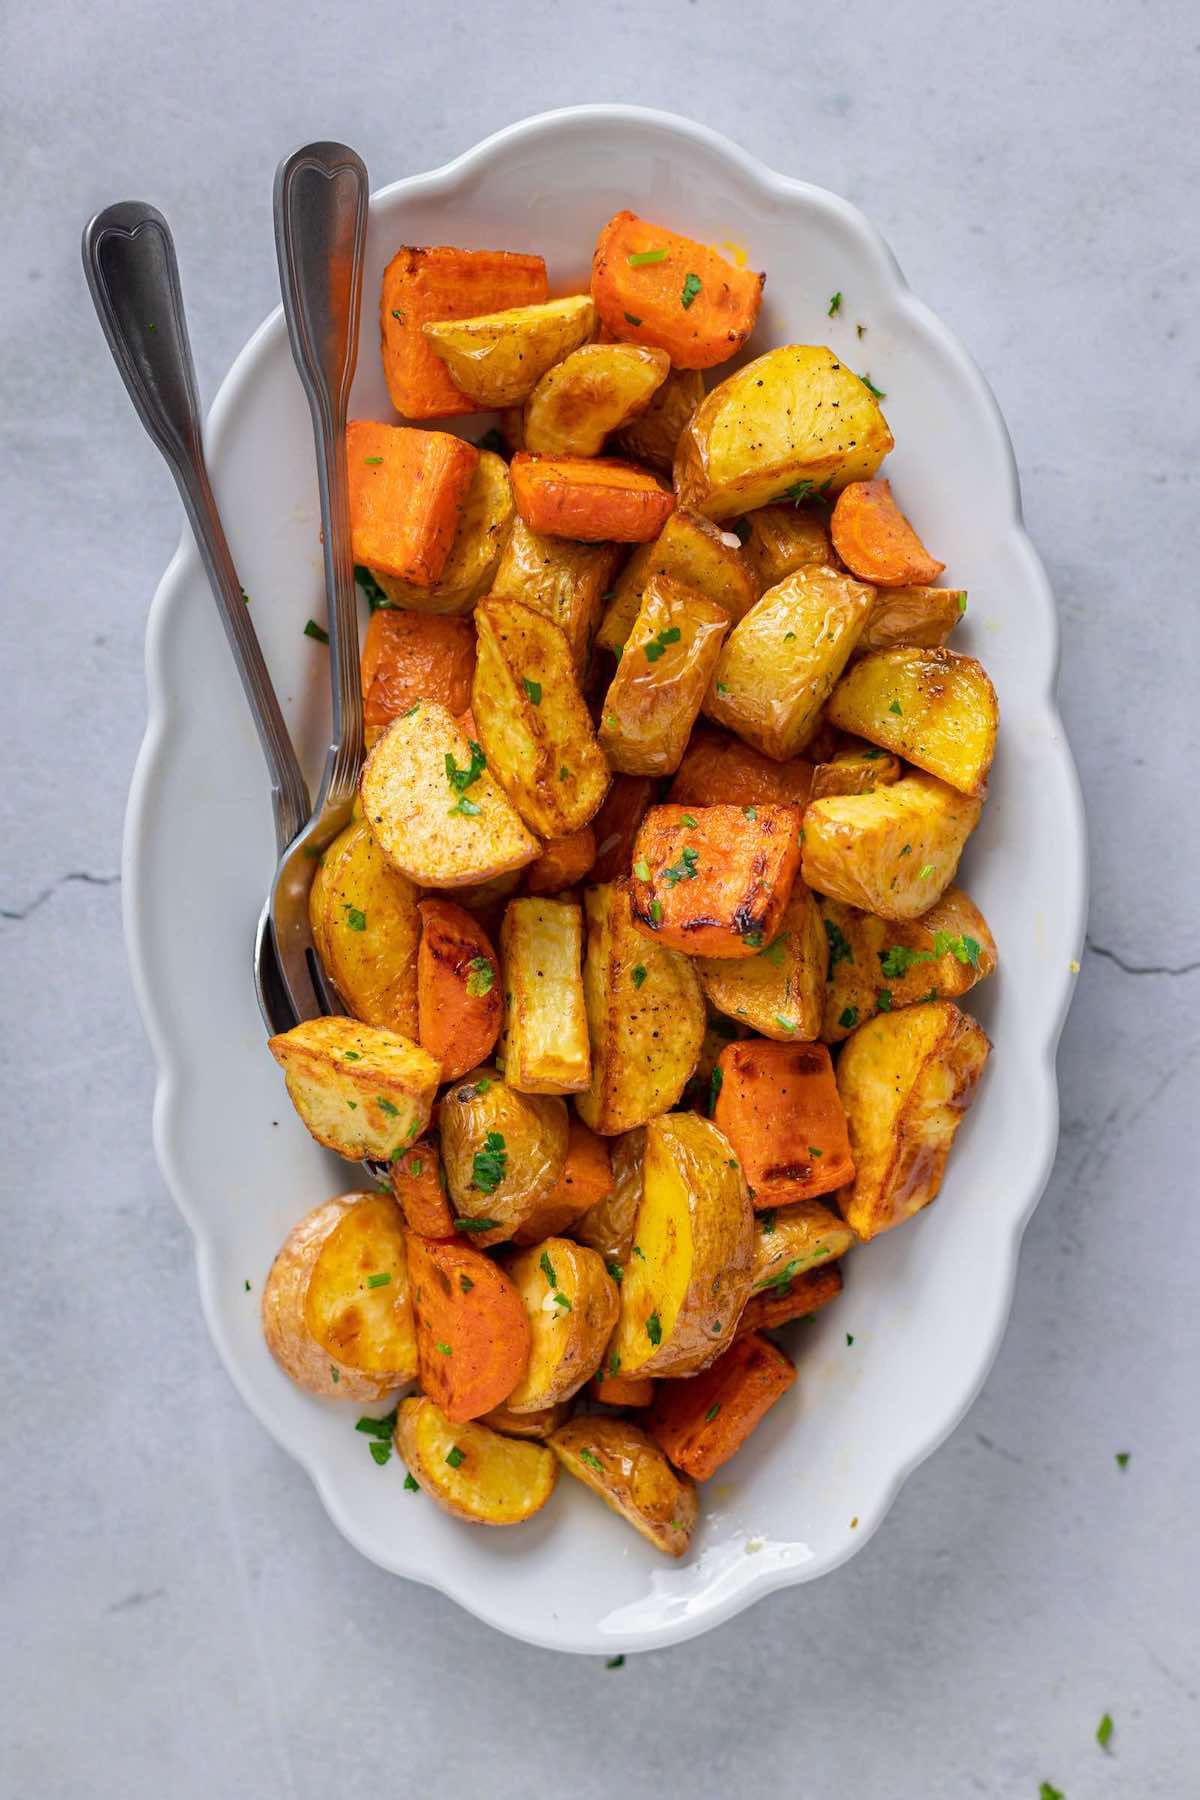 roasted potatoes and carrots.